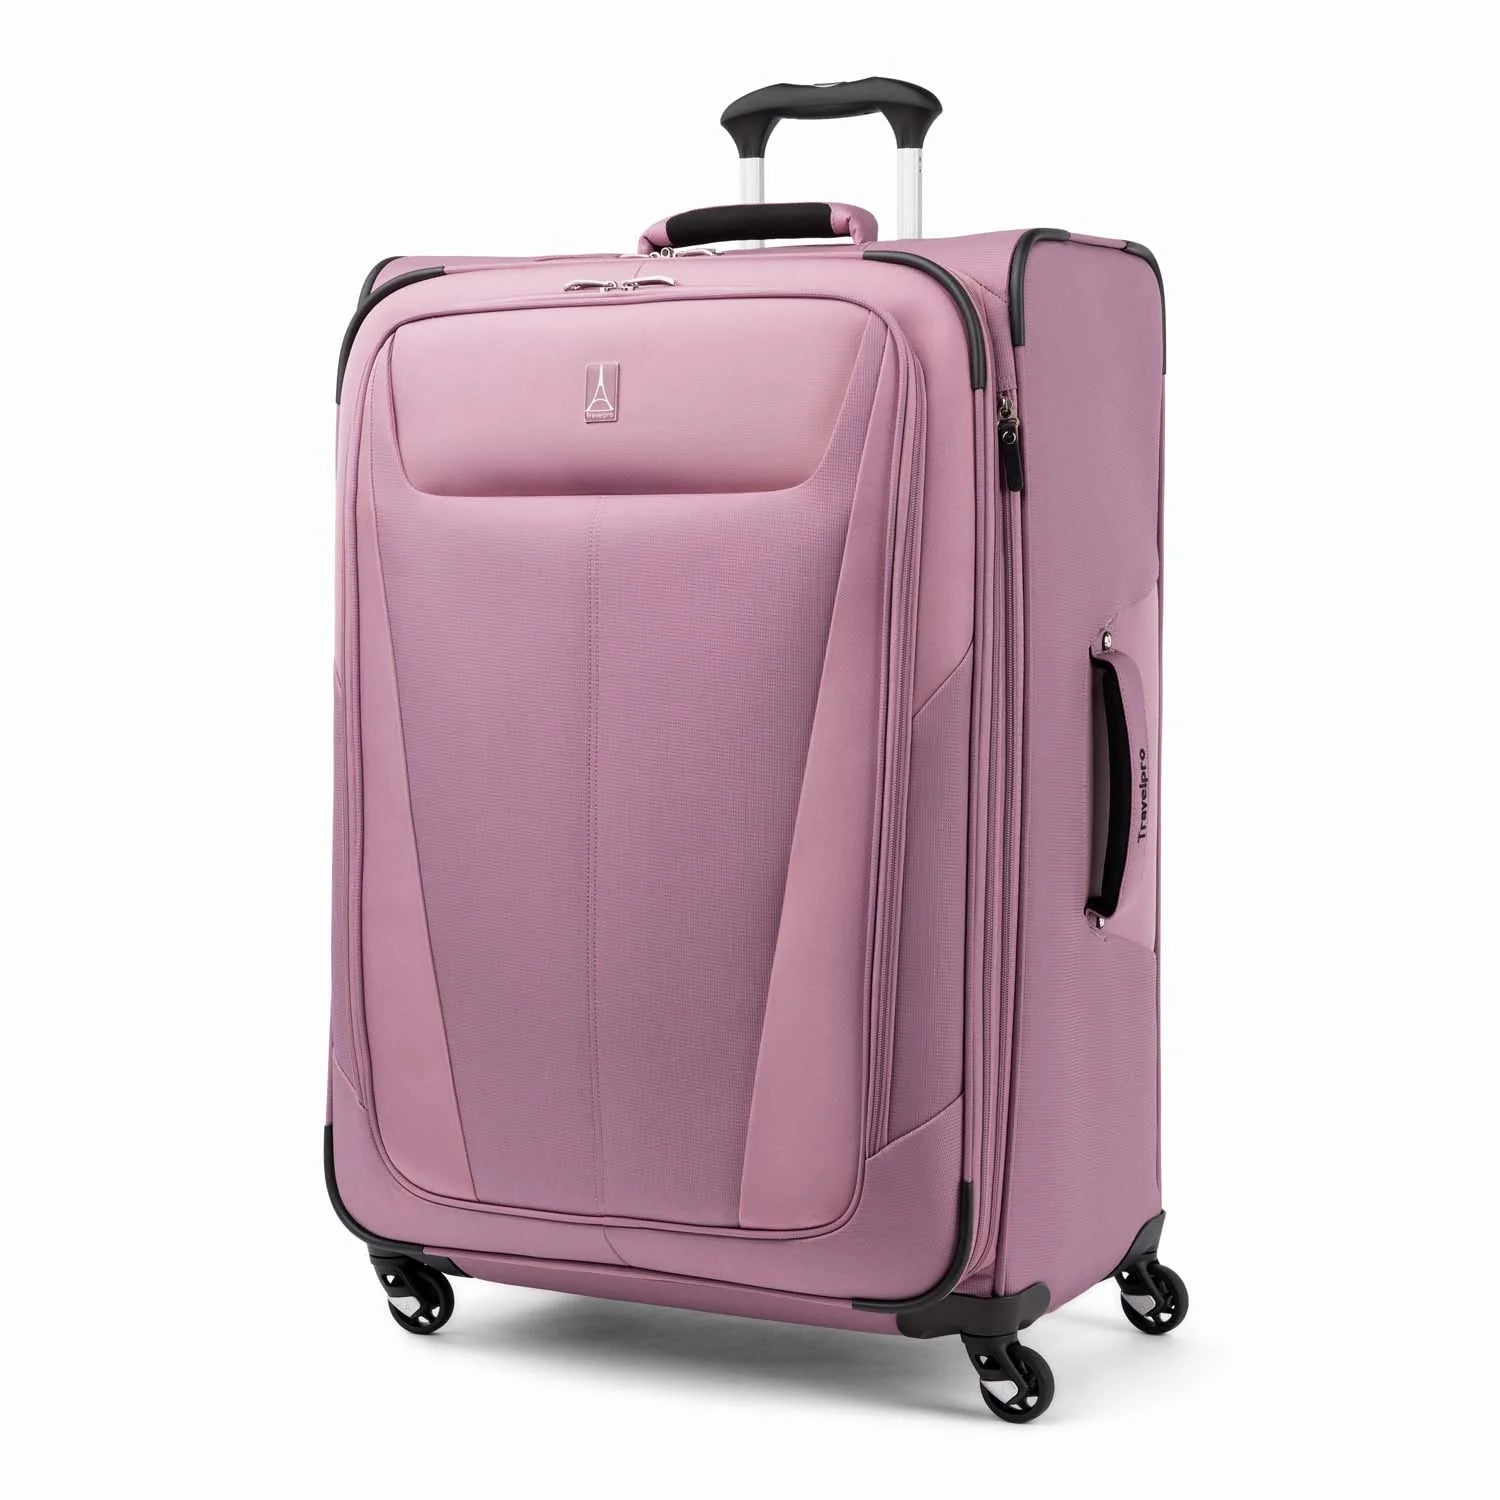 Travelpro Maxlite 5 29 Inch Expandable Spinner Luggage - Orchid